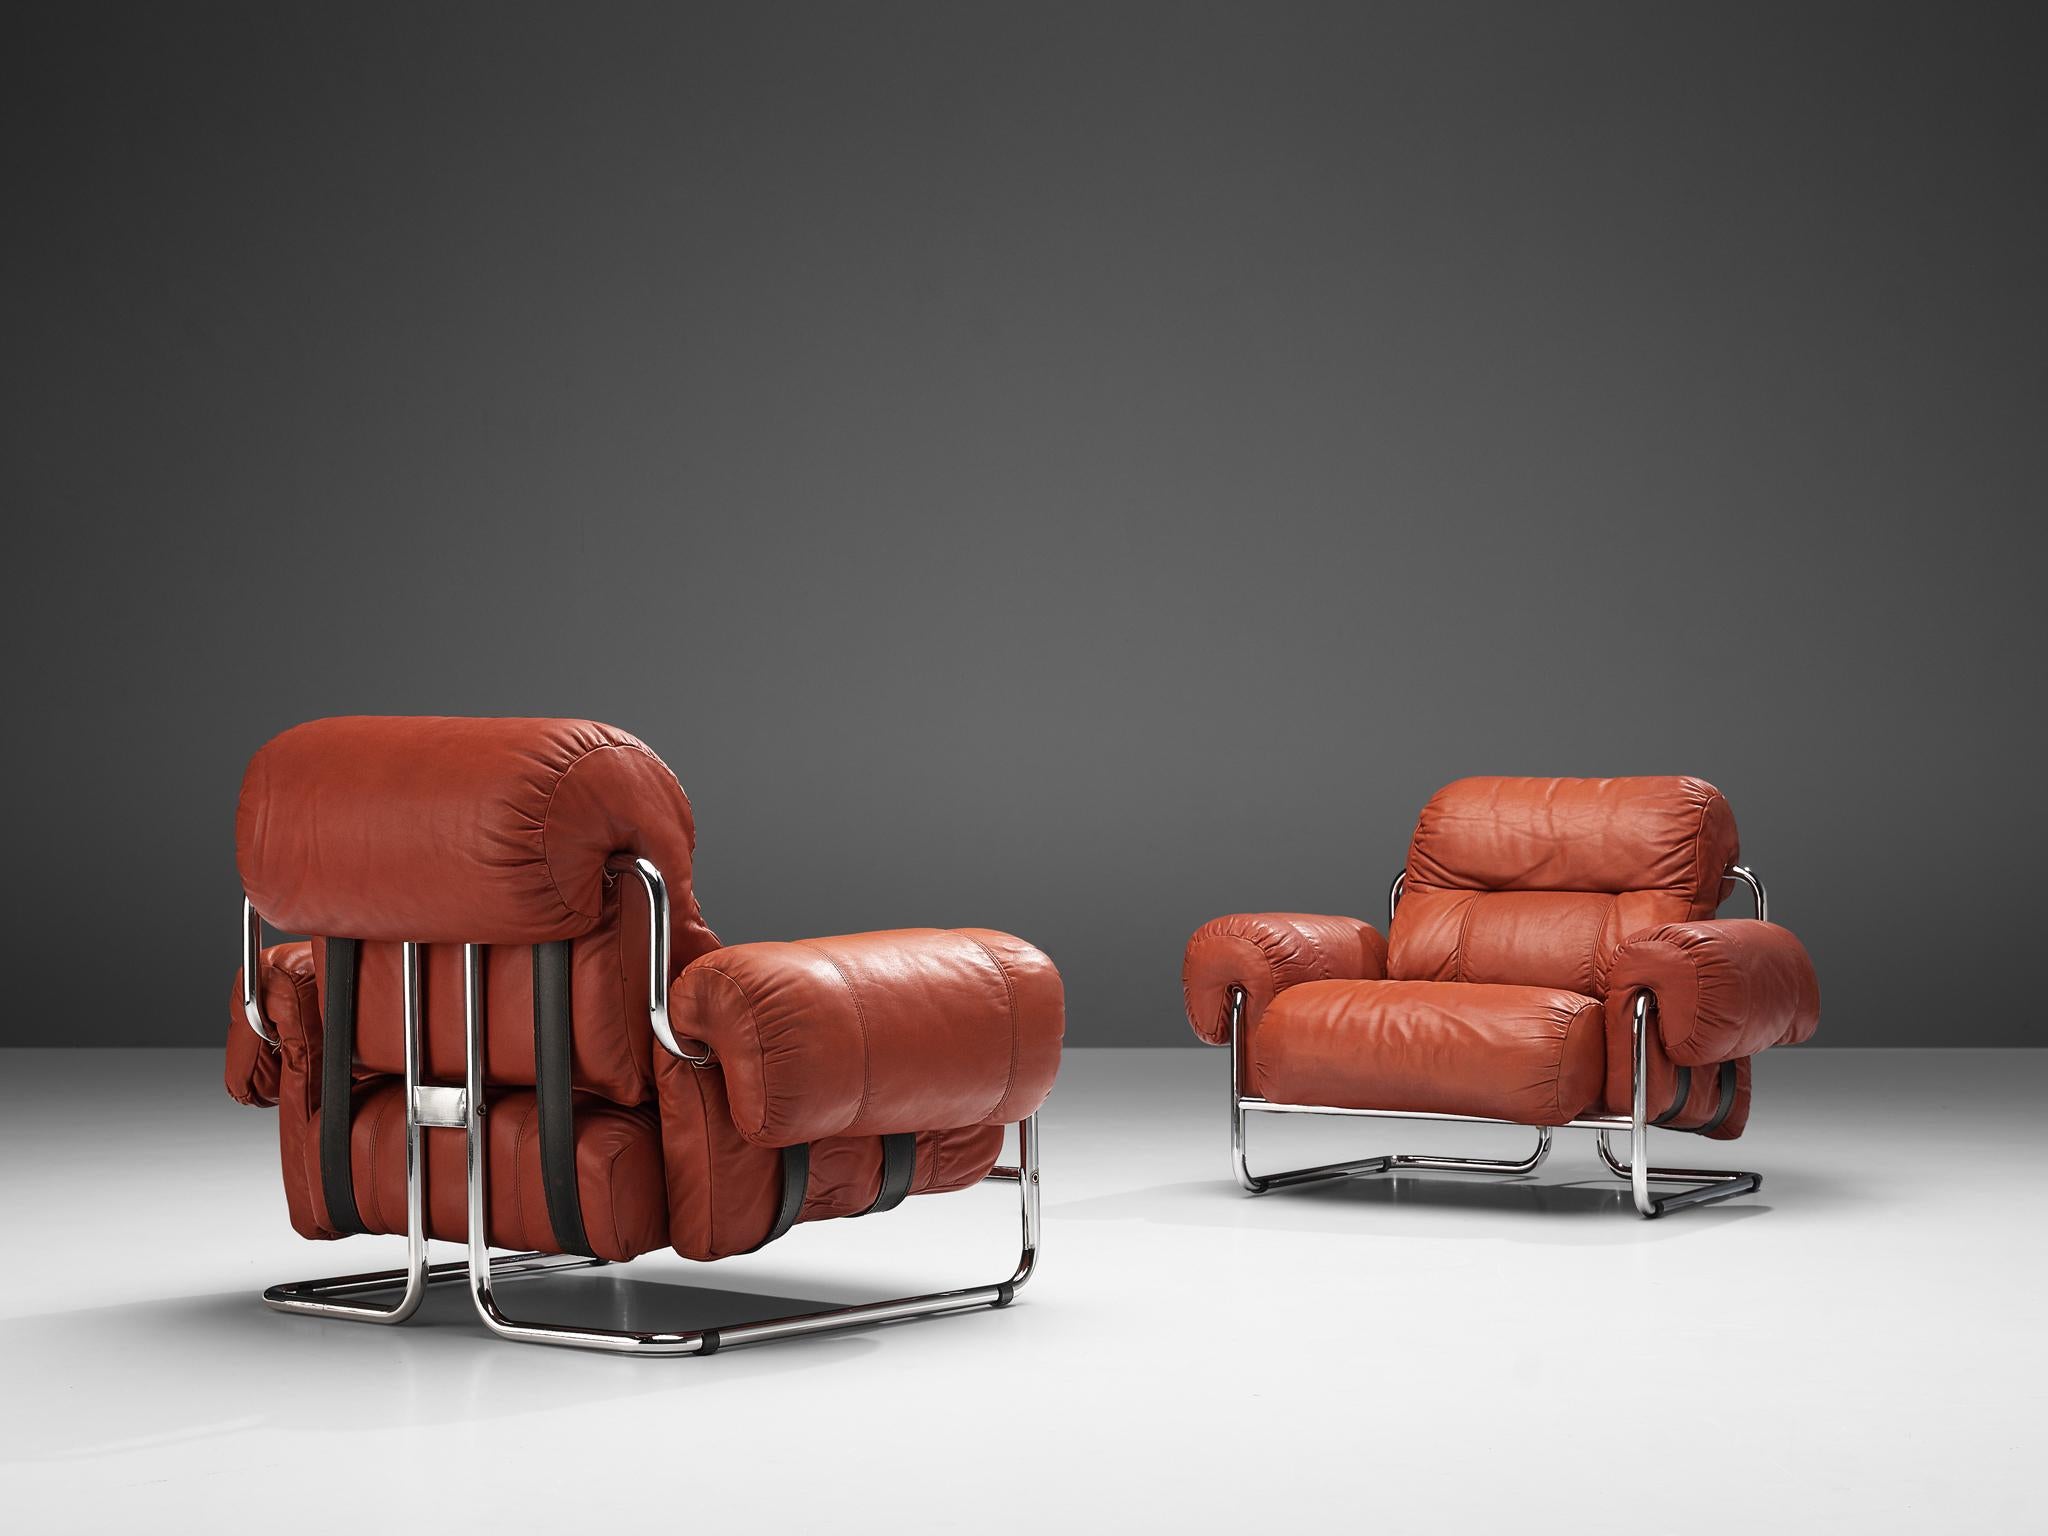 Guido Faleschini for Mariani, pair of armchairs, model 'Tucroma' red leather, chrome, Italy, 1970s

Rare pair of lounge chairs, designed by Guido Faleschini for Mariani in the early 1970s. The chairs have a tubular chrome structure as a frame with